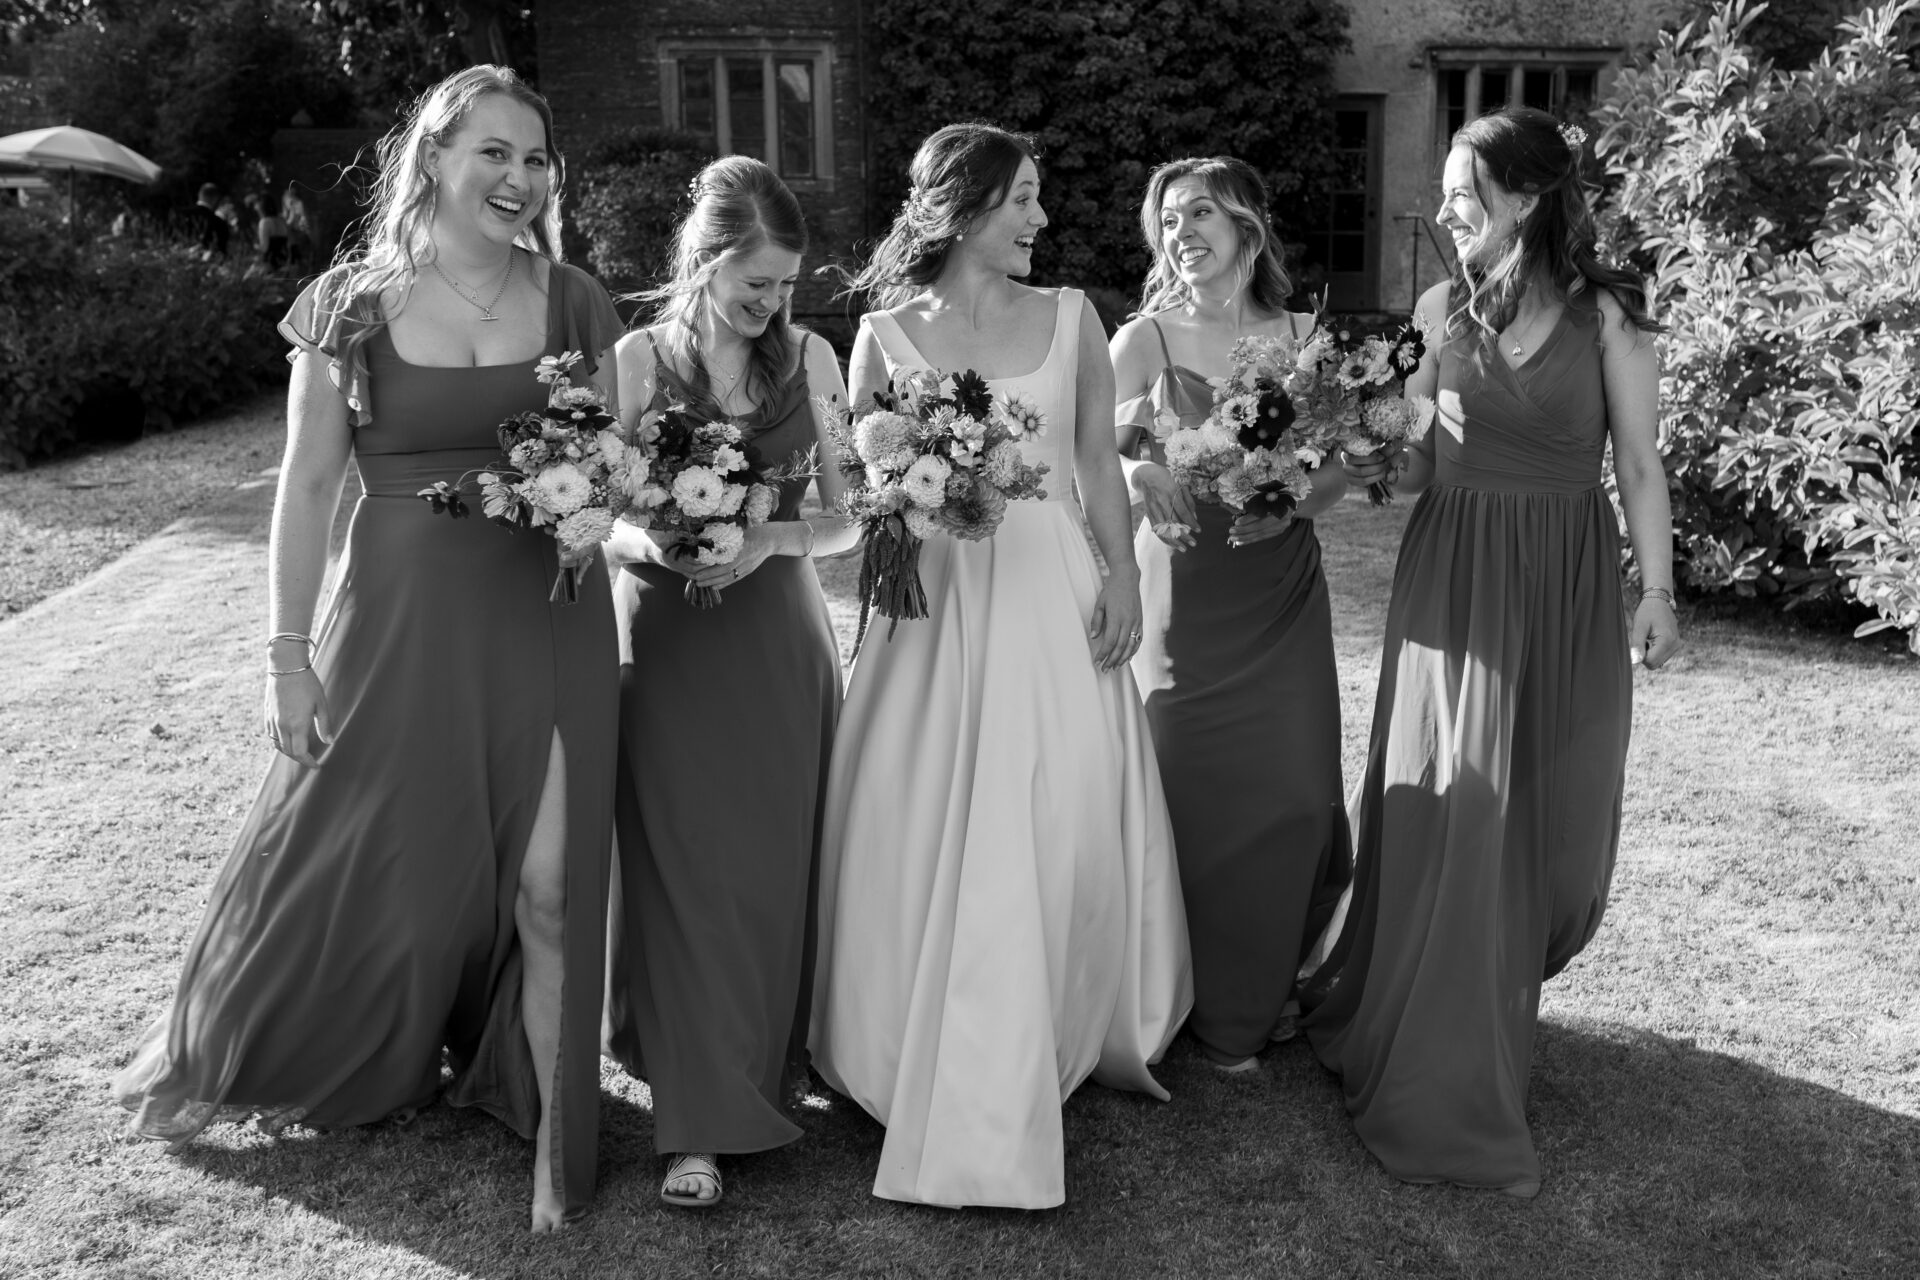 The bride poses for photos with her bridesmaids during her Somerset marquee wedding reception